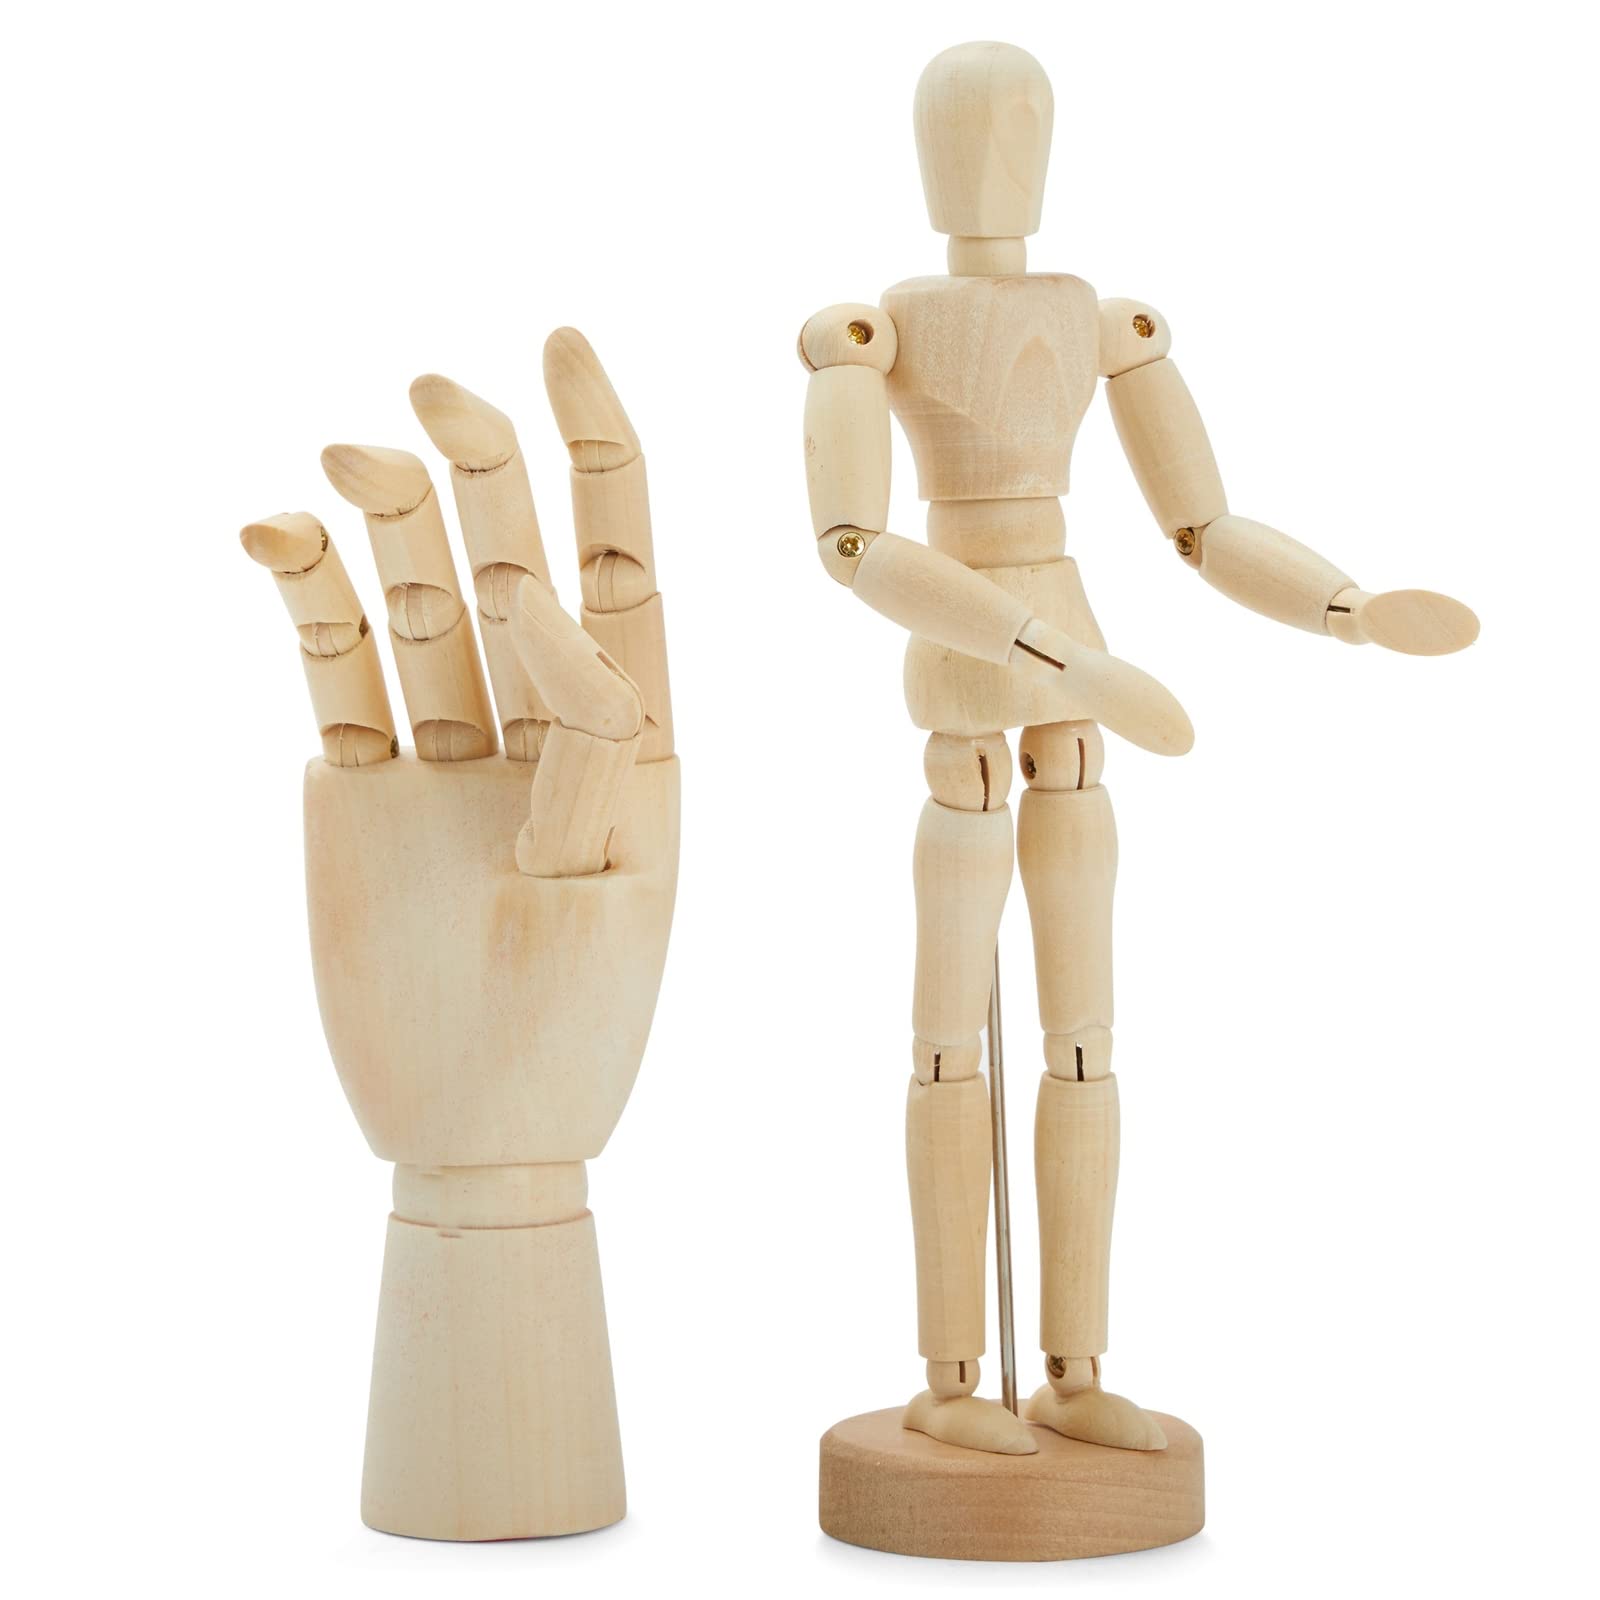 7 Wooden Hand Model and 8 Posable Wooden Mannequin Figure for